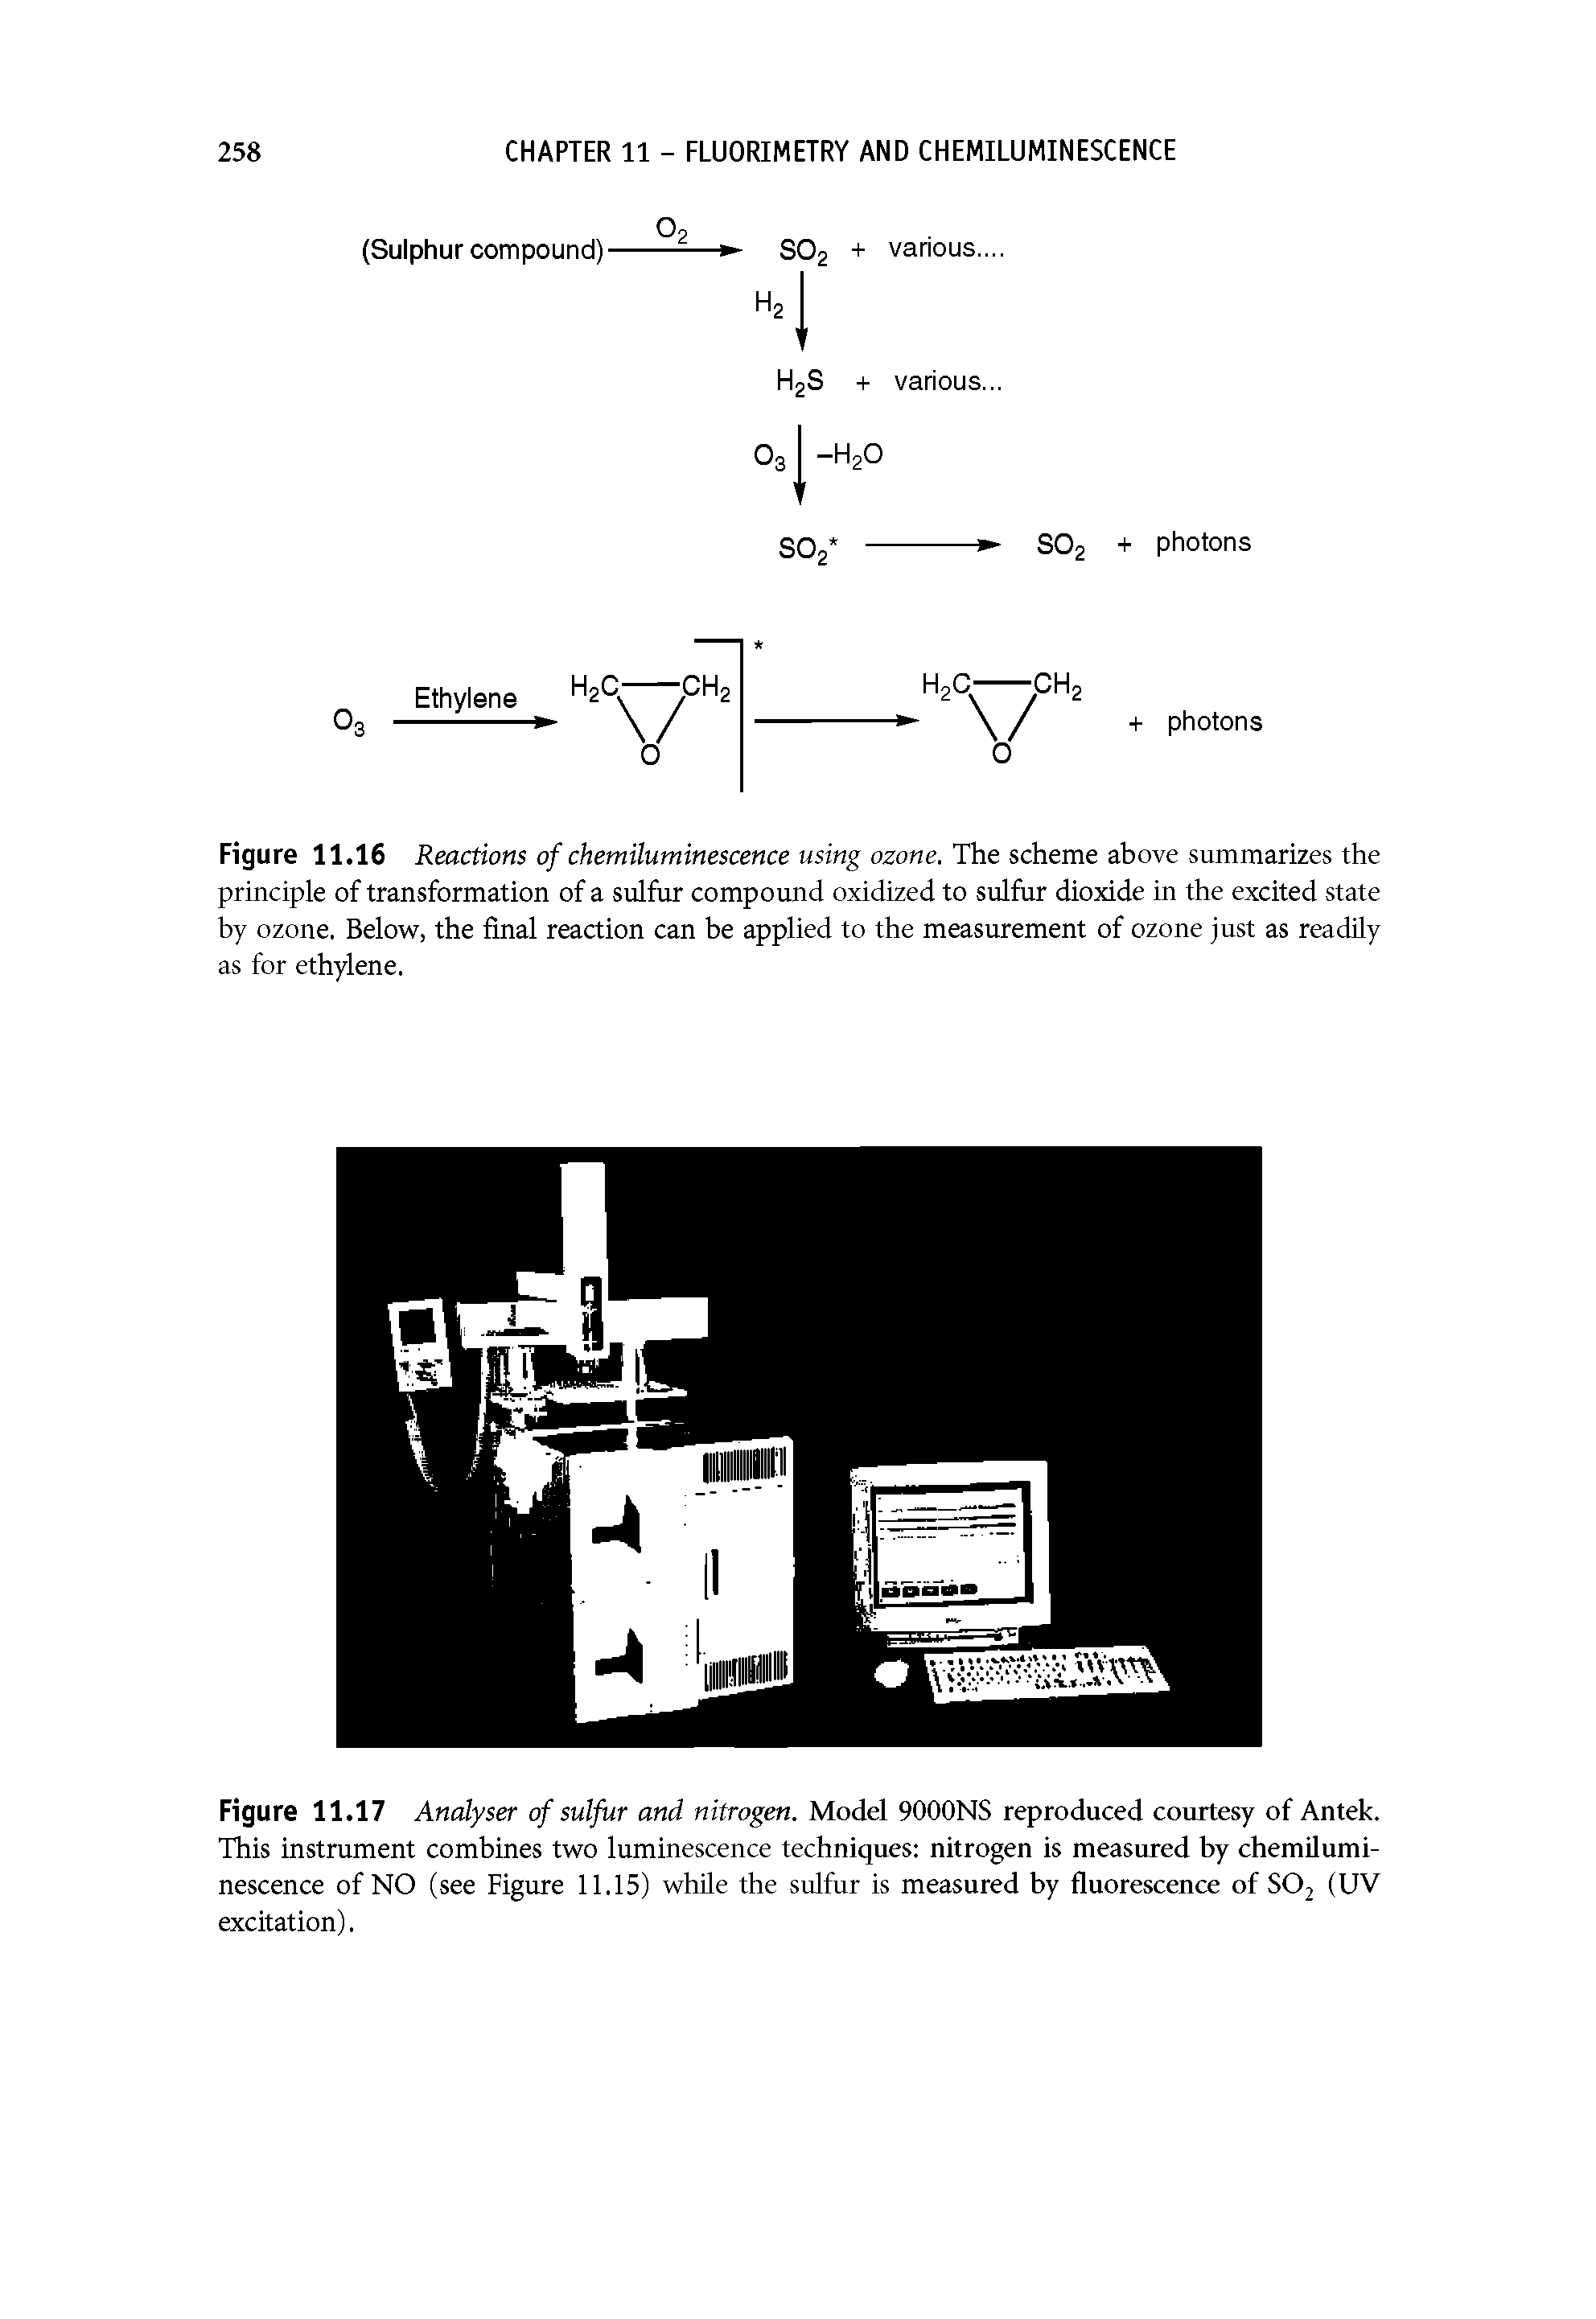 Figure 11.16 Reactions of chemiluminescence using ozone. The scheme above summarizes the principle of transformation of a sulfur compound oxidized to sulfur dioxide in the excited state by ozone. Below, the final reaction can be applied to the measurement of ozone just as readily as for ethylene.